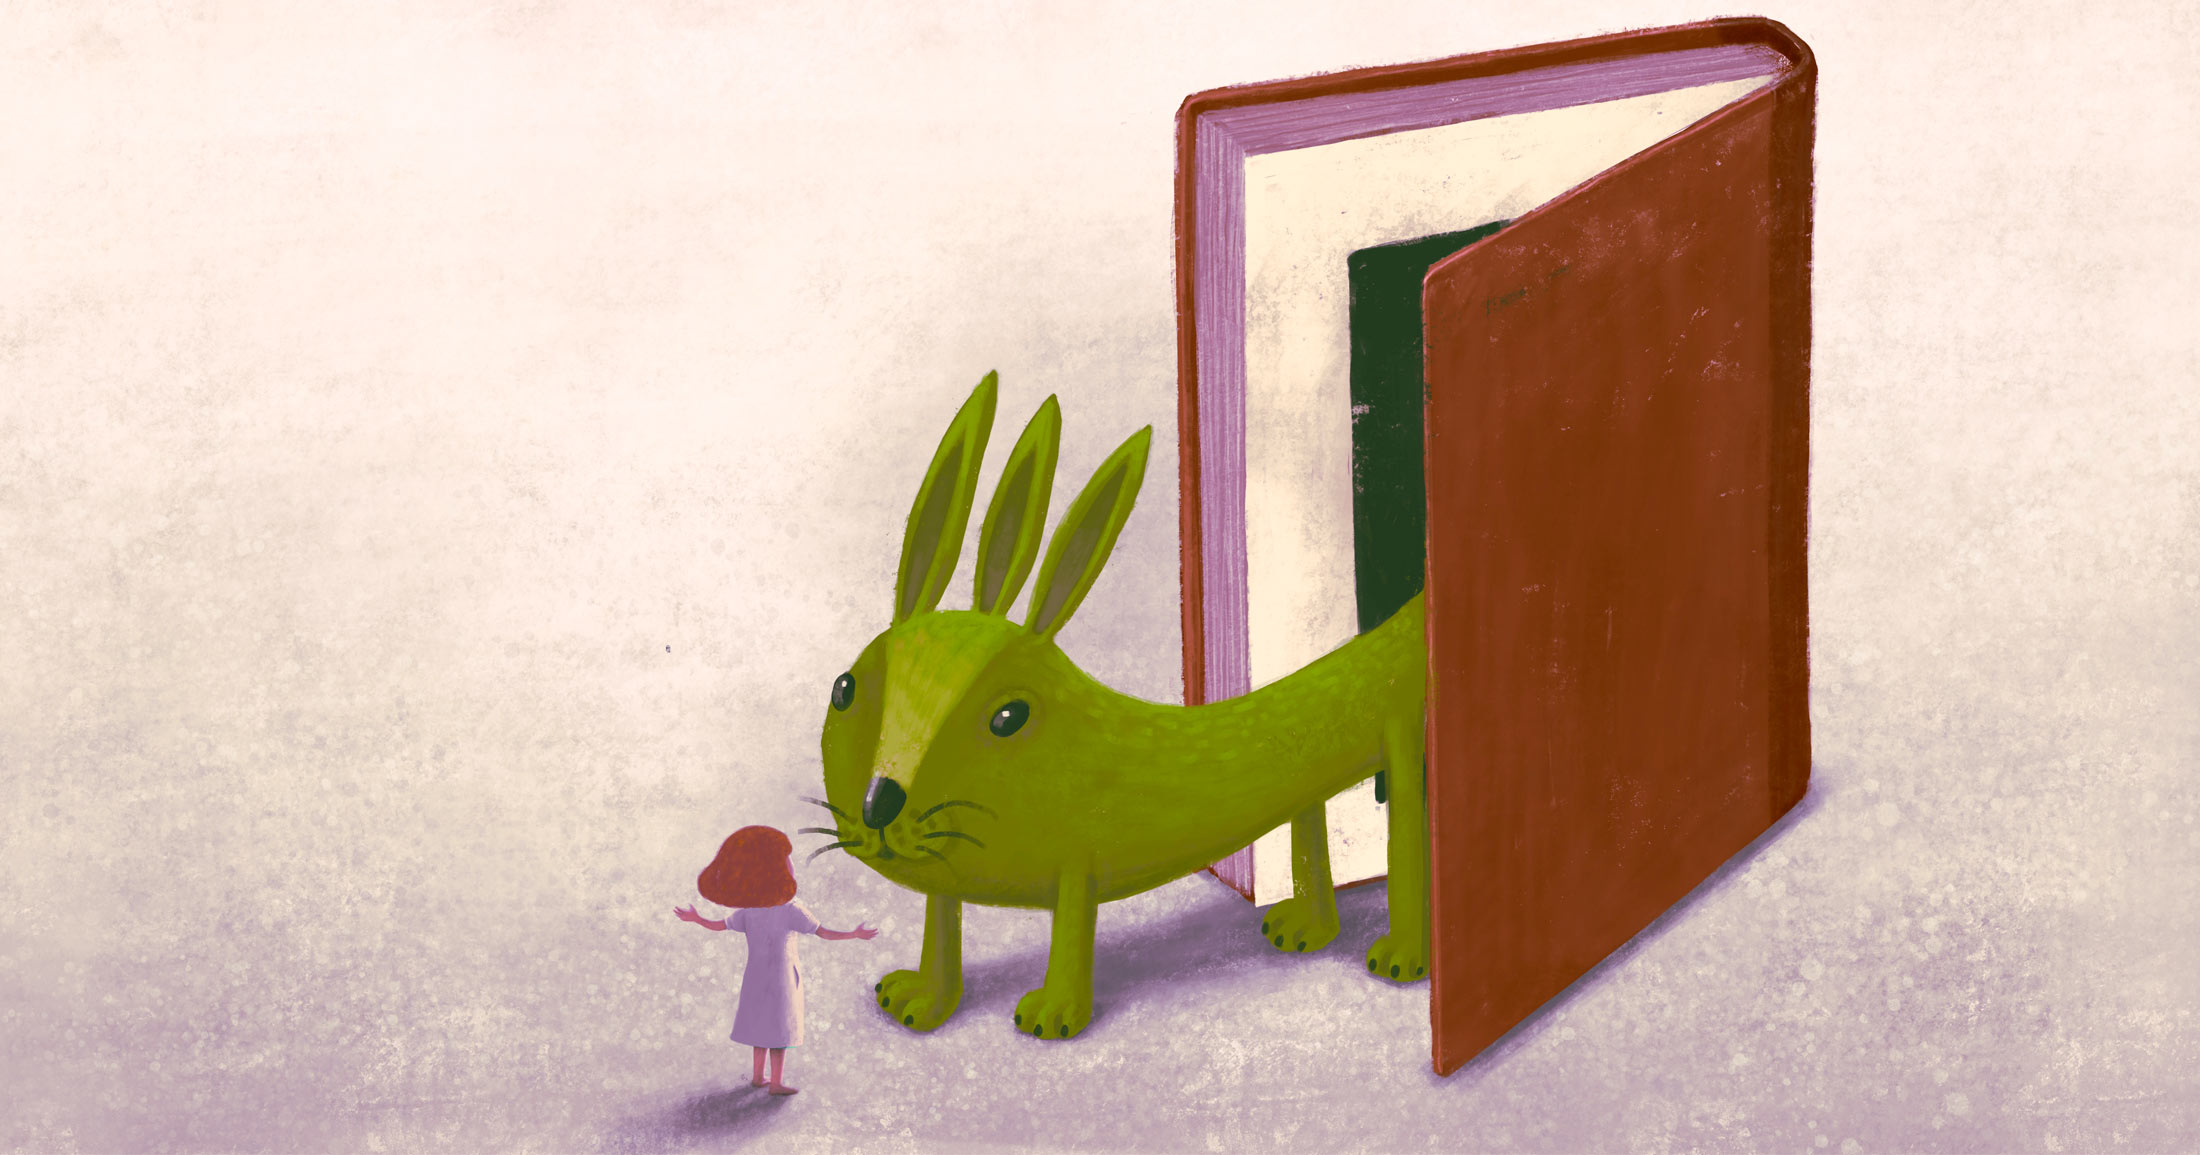 Illustration of a tiny person and a giant book and there's a green rabbit walking out of the book to greet the tiny human.